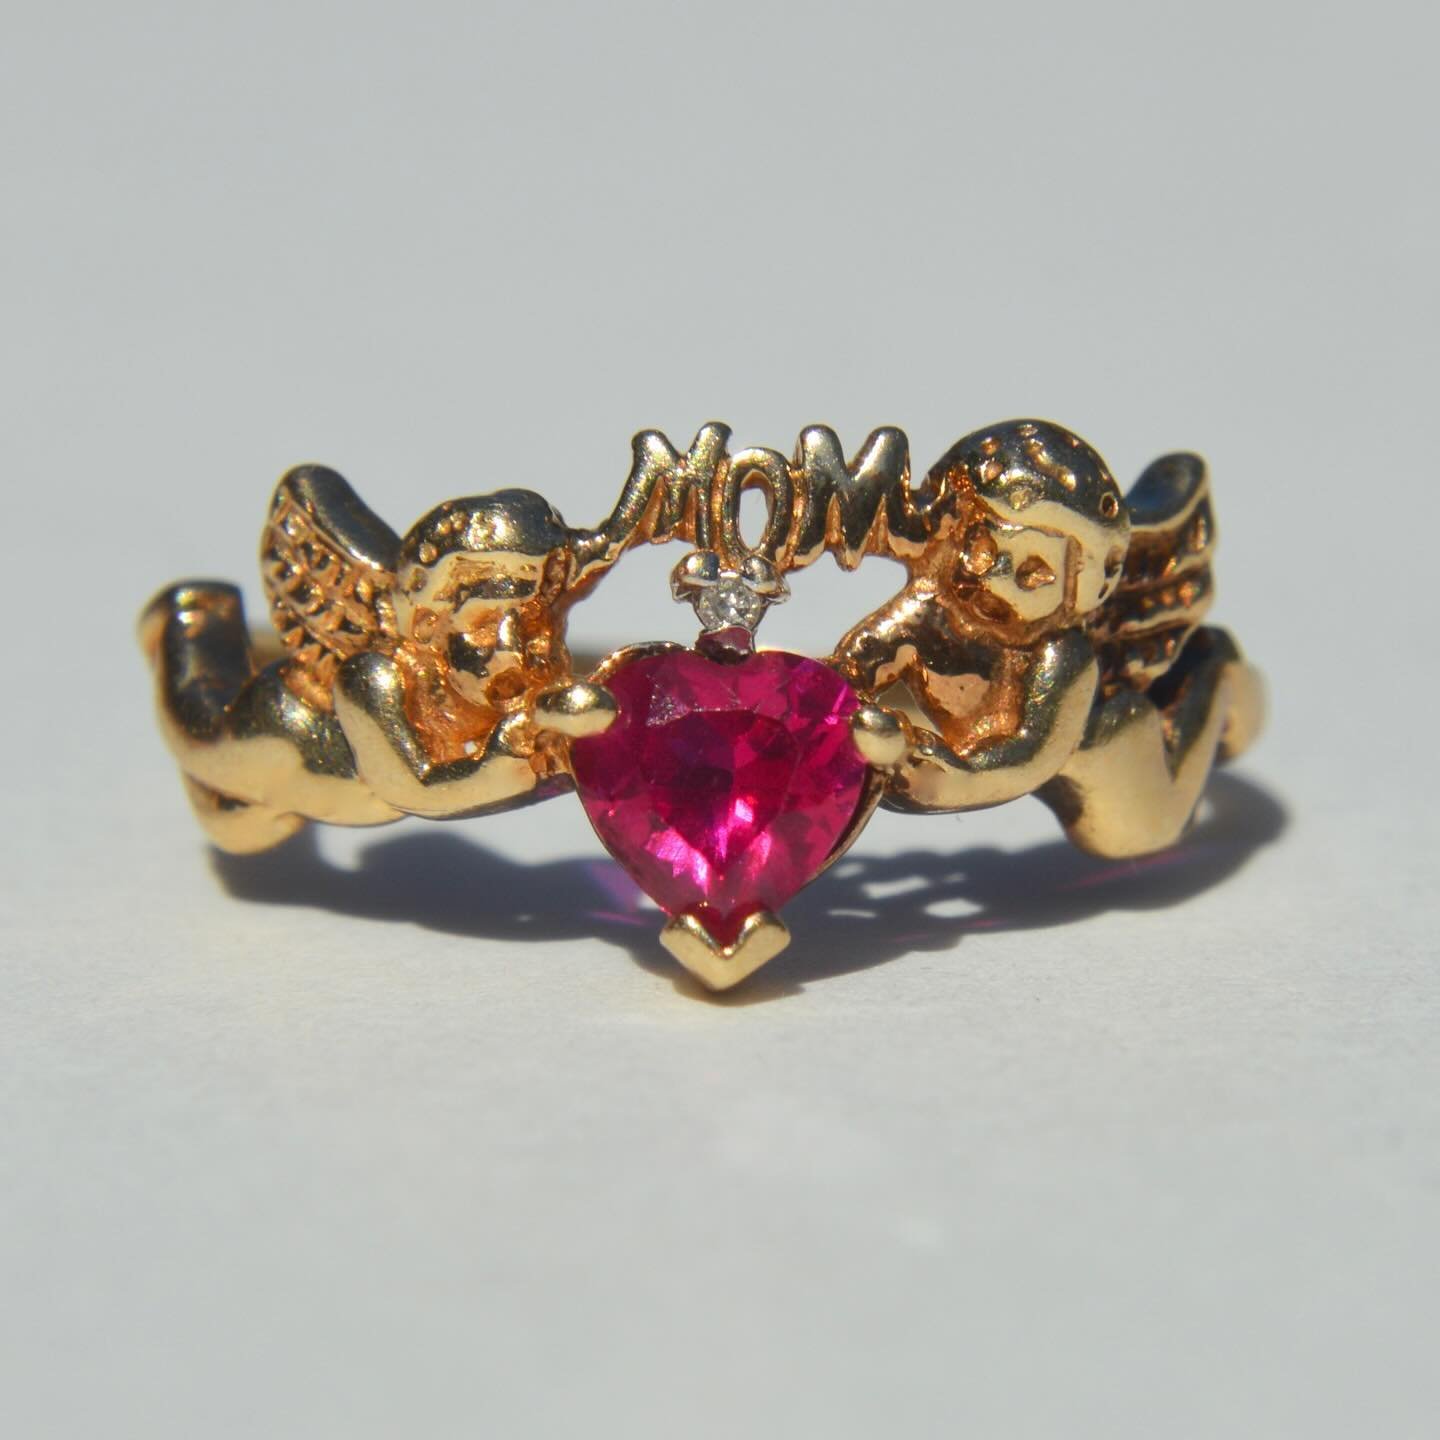 Mother&rsquo;s Day is May 12! Still looking for that perfect gift for a special MOM in your orbit?! Look no further than this completely adorbs vintage 10K diamond heart cut ruby with a pair of sweet cherubs 👼🩷👼 Online now, tap post to shop or lin